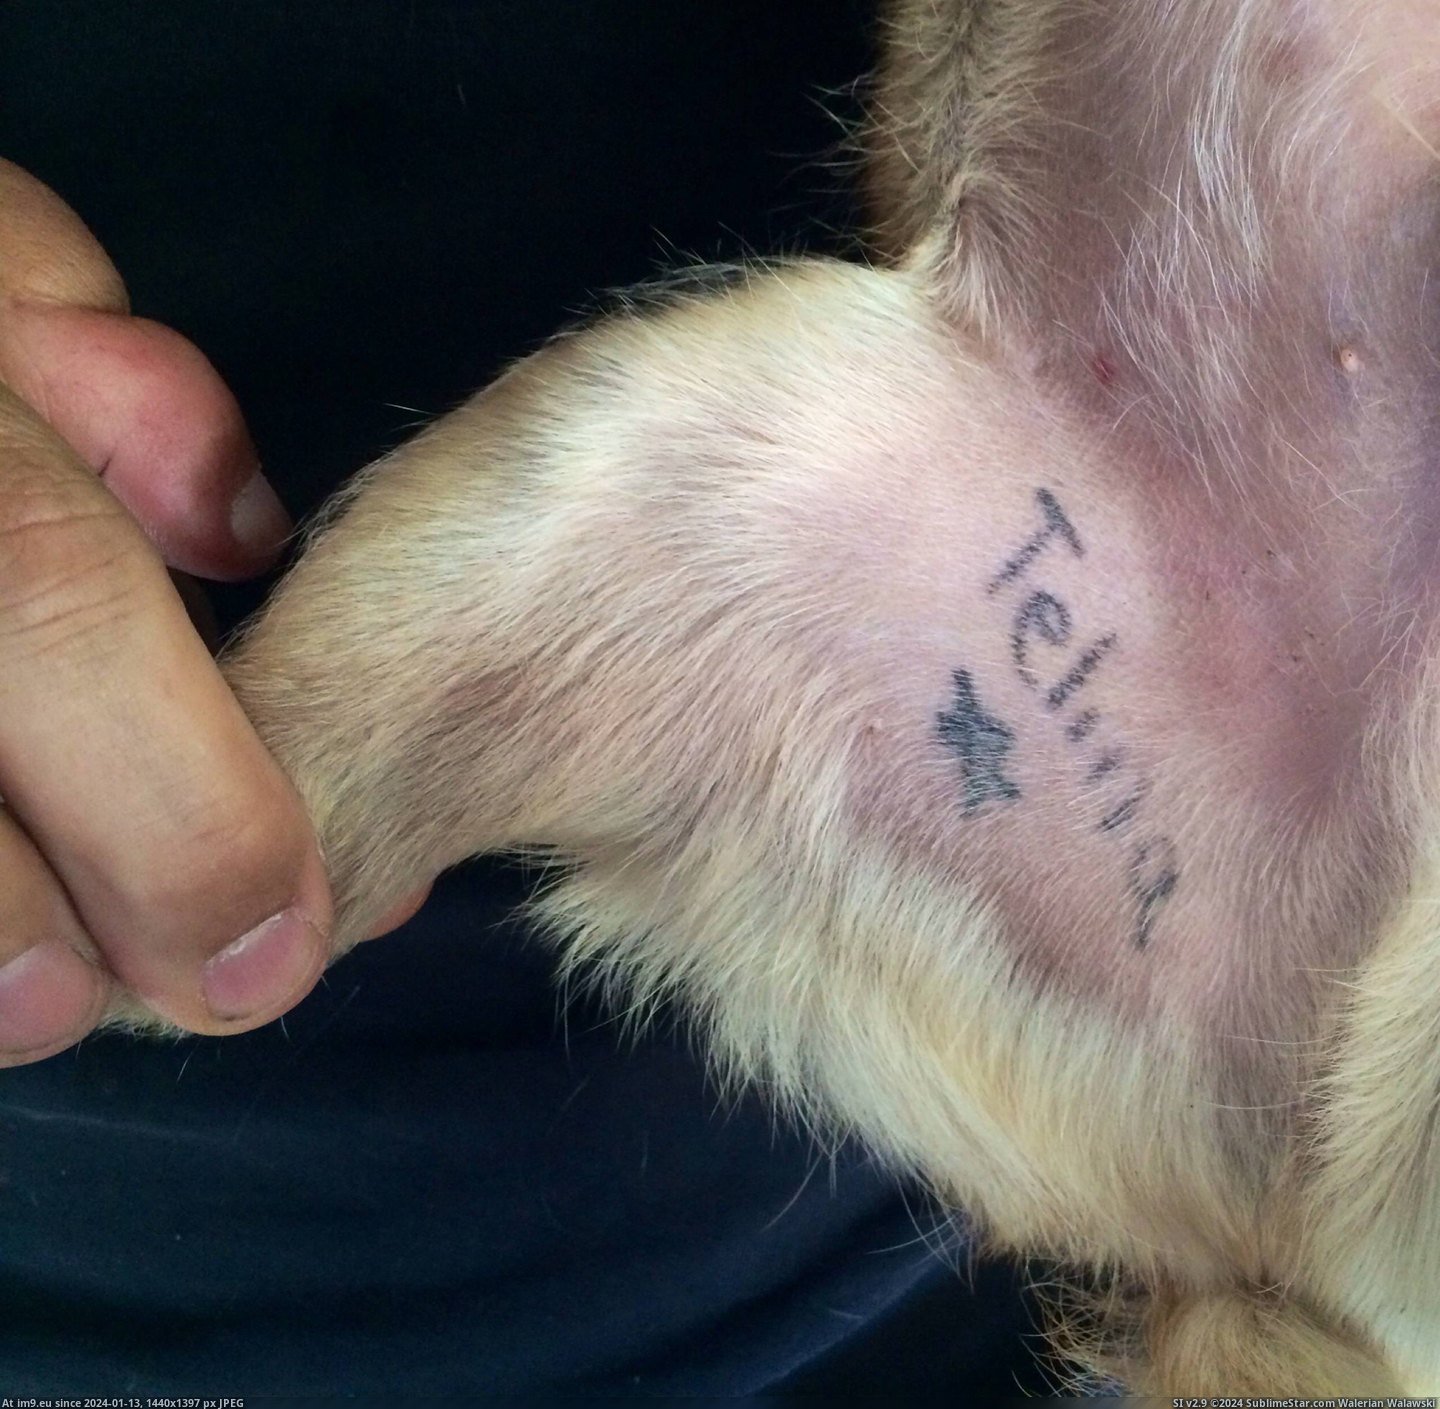 #Wtf #Tattoo #Parents #Adopted #Owner #Dog #Previous [Wtf] My parents adopted a dog. He has a tattoo from a previous owner. Pic. (Bild von album My r/WTF favs))